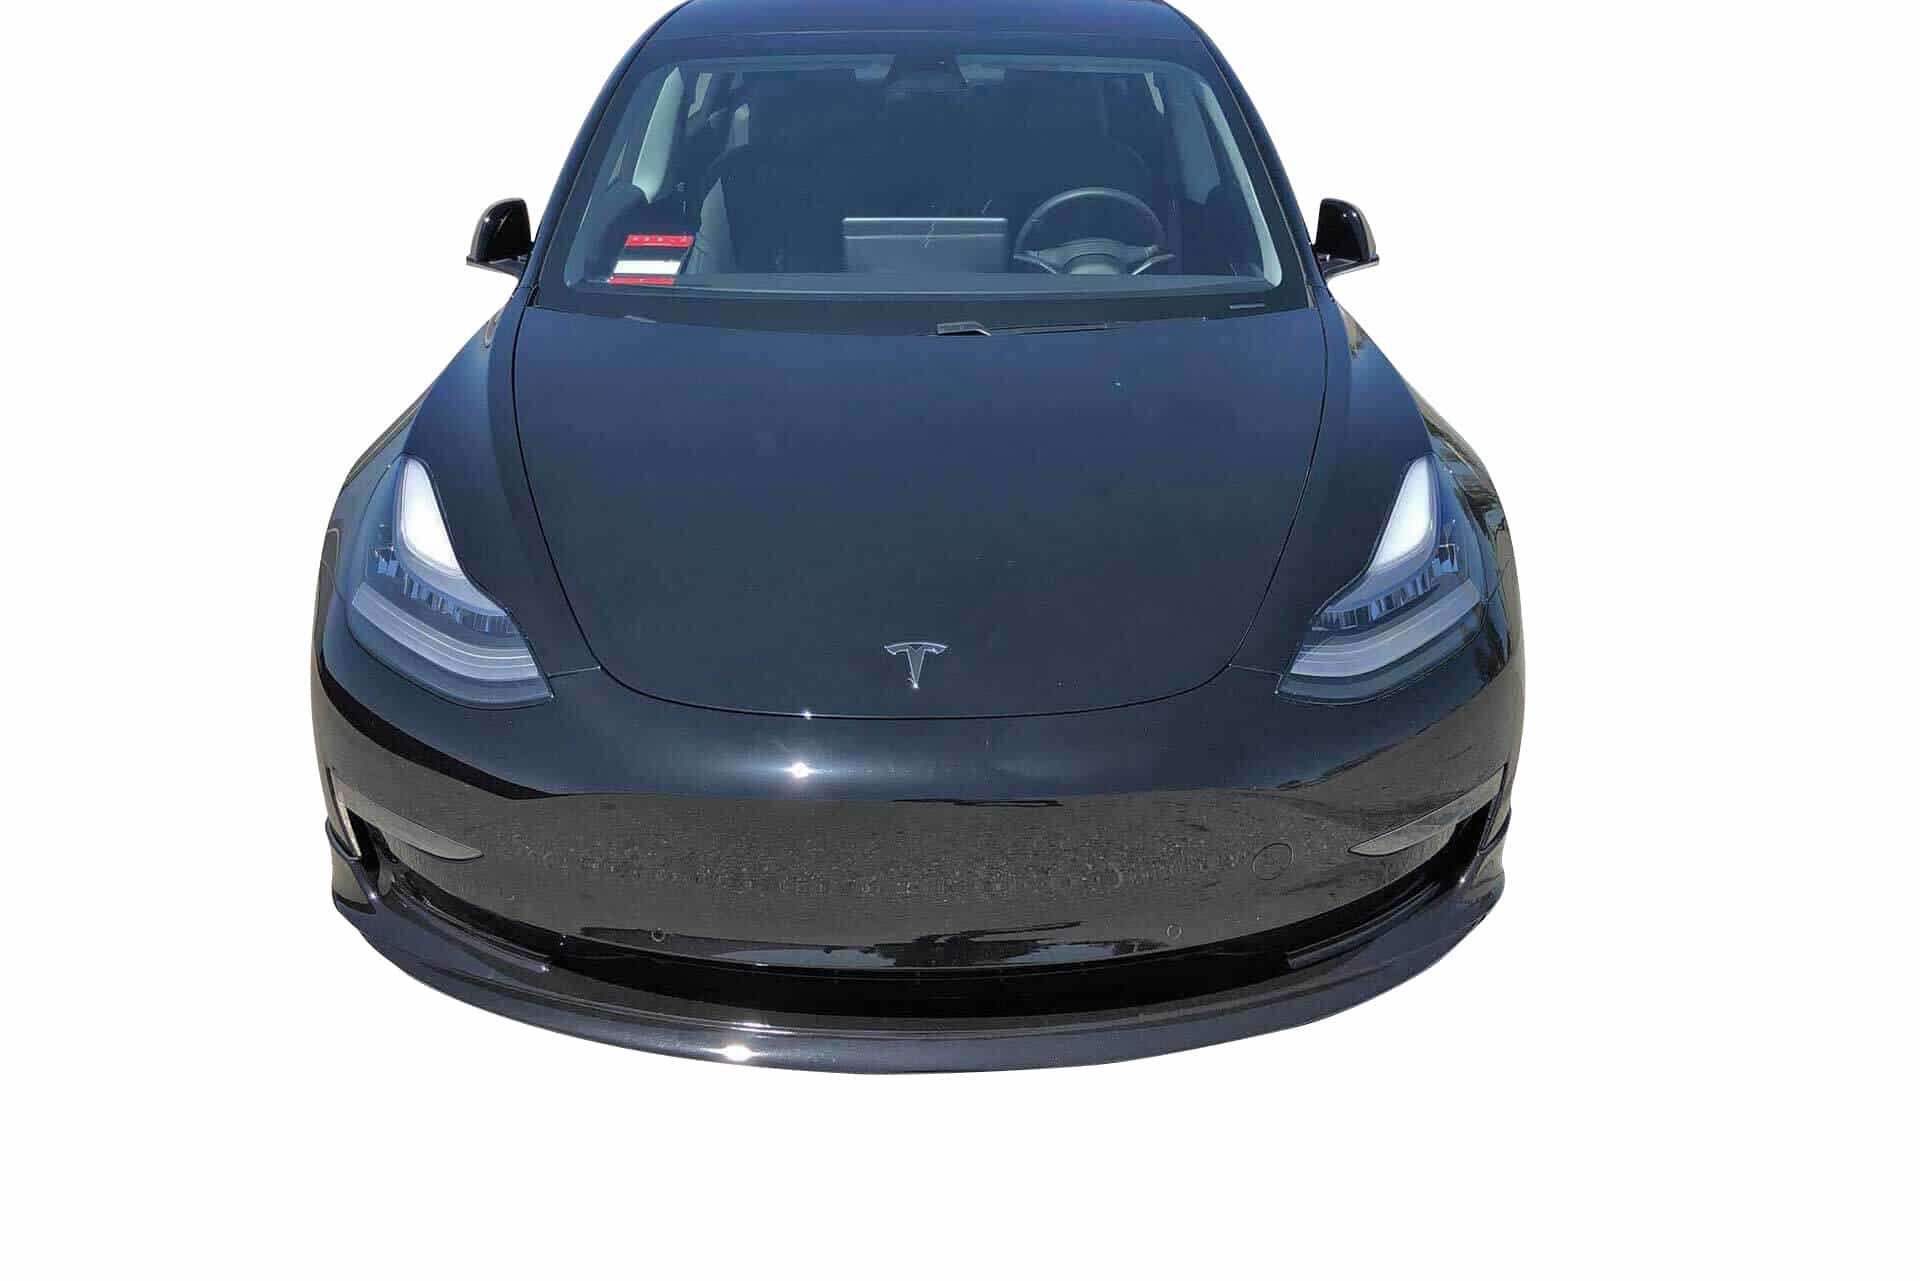 Check price and buy Unplugged Performance Carbon Fiber Body kit Set for Tesla Model 3